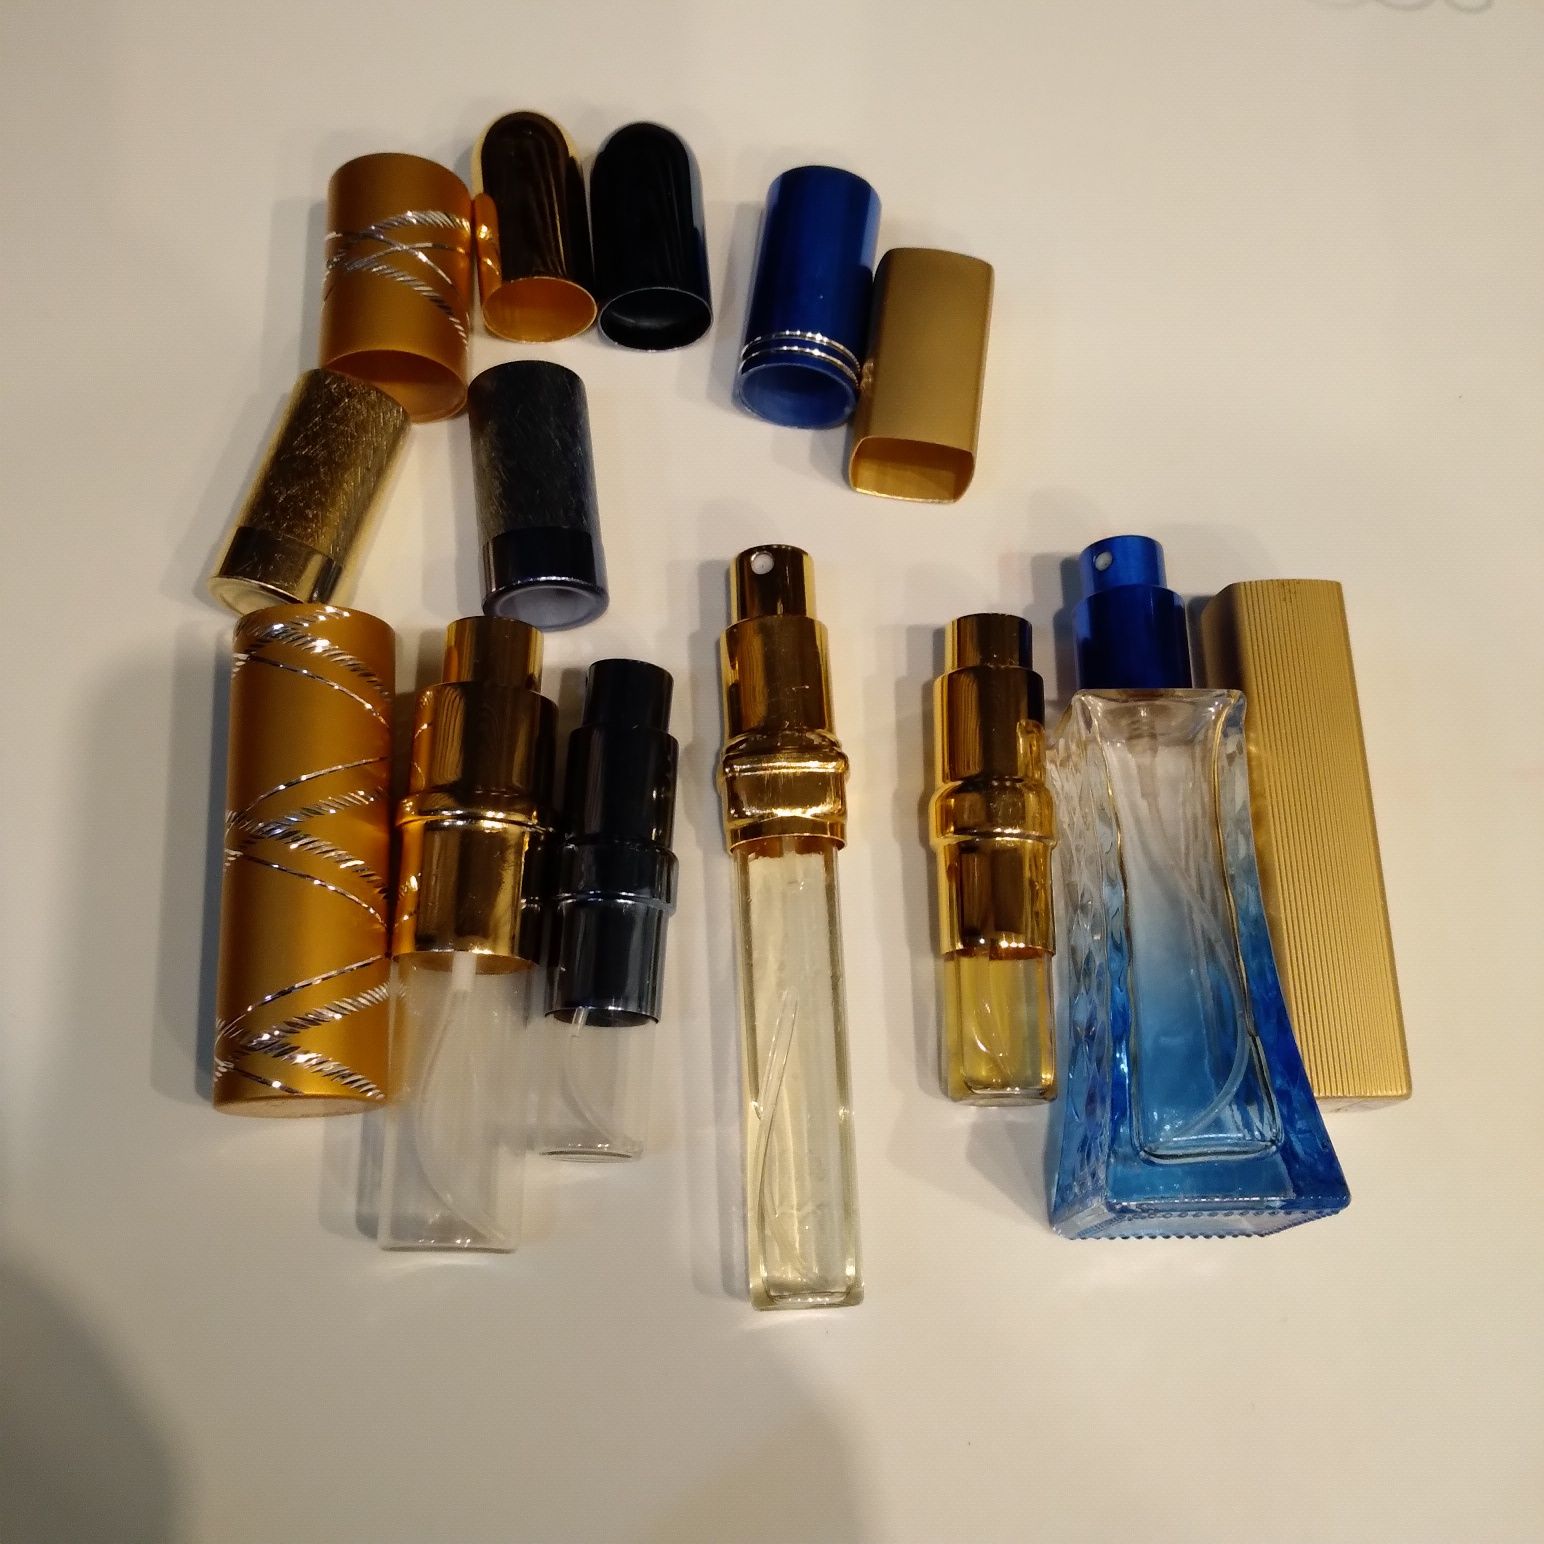 Atomizer na perfumy, kenzo amour,cuir de nuit rocher